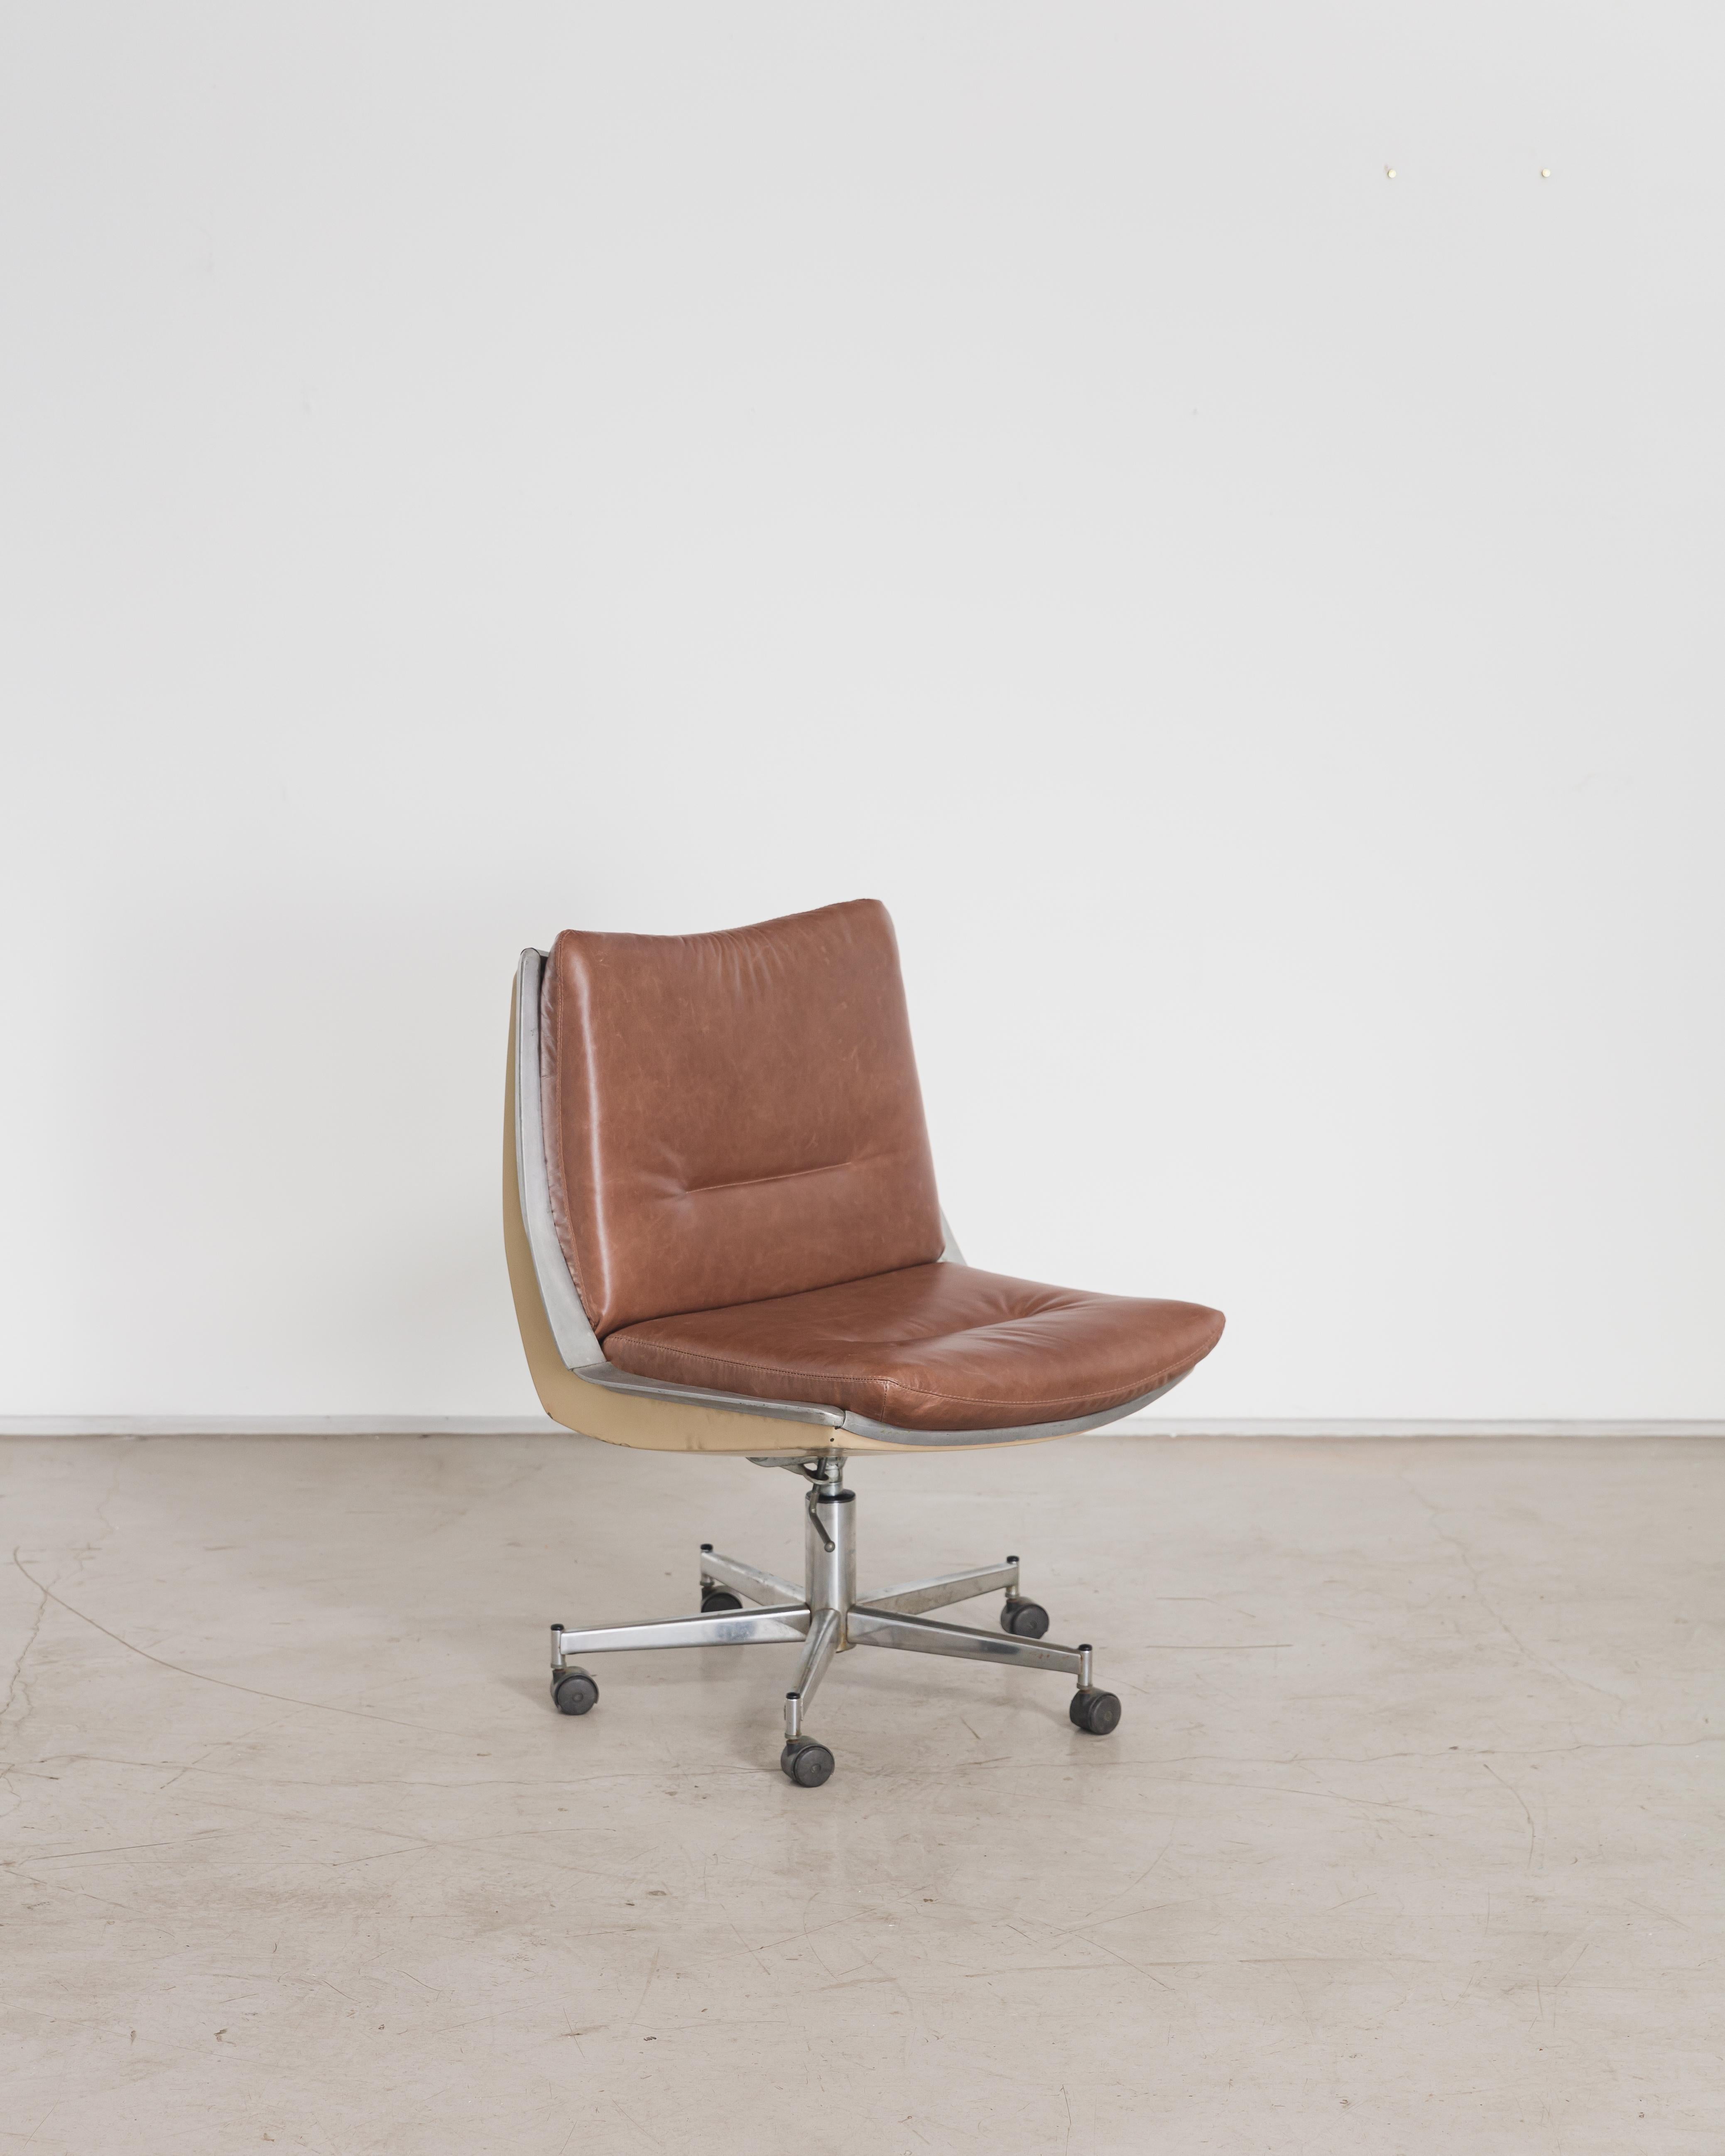 Created by Jorge Zalszupin (1922-2020) and his design team, the Commander chair was designed to attend to the growing market for office furniture. The first model was developed between 1972 and 1973 and had casters; later, it gave rise to a